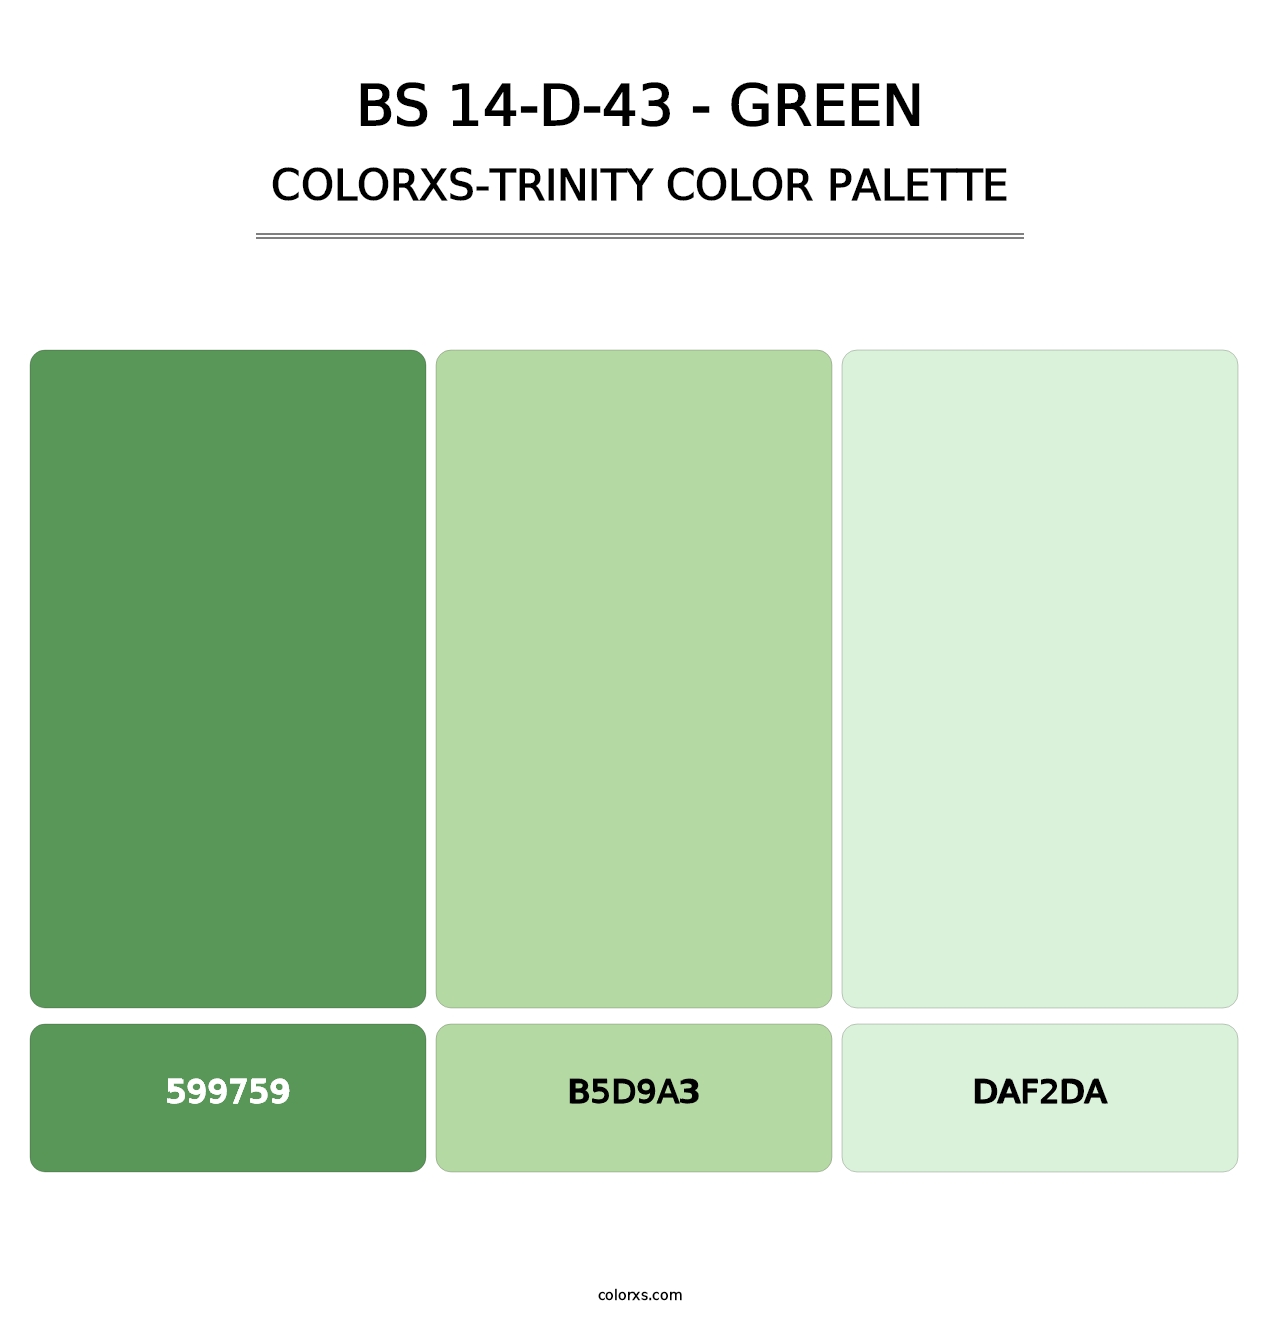 BS 14-D-43 - Green - Colorxs Trinity Palette